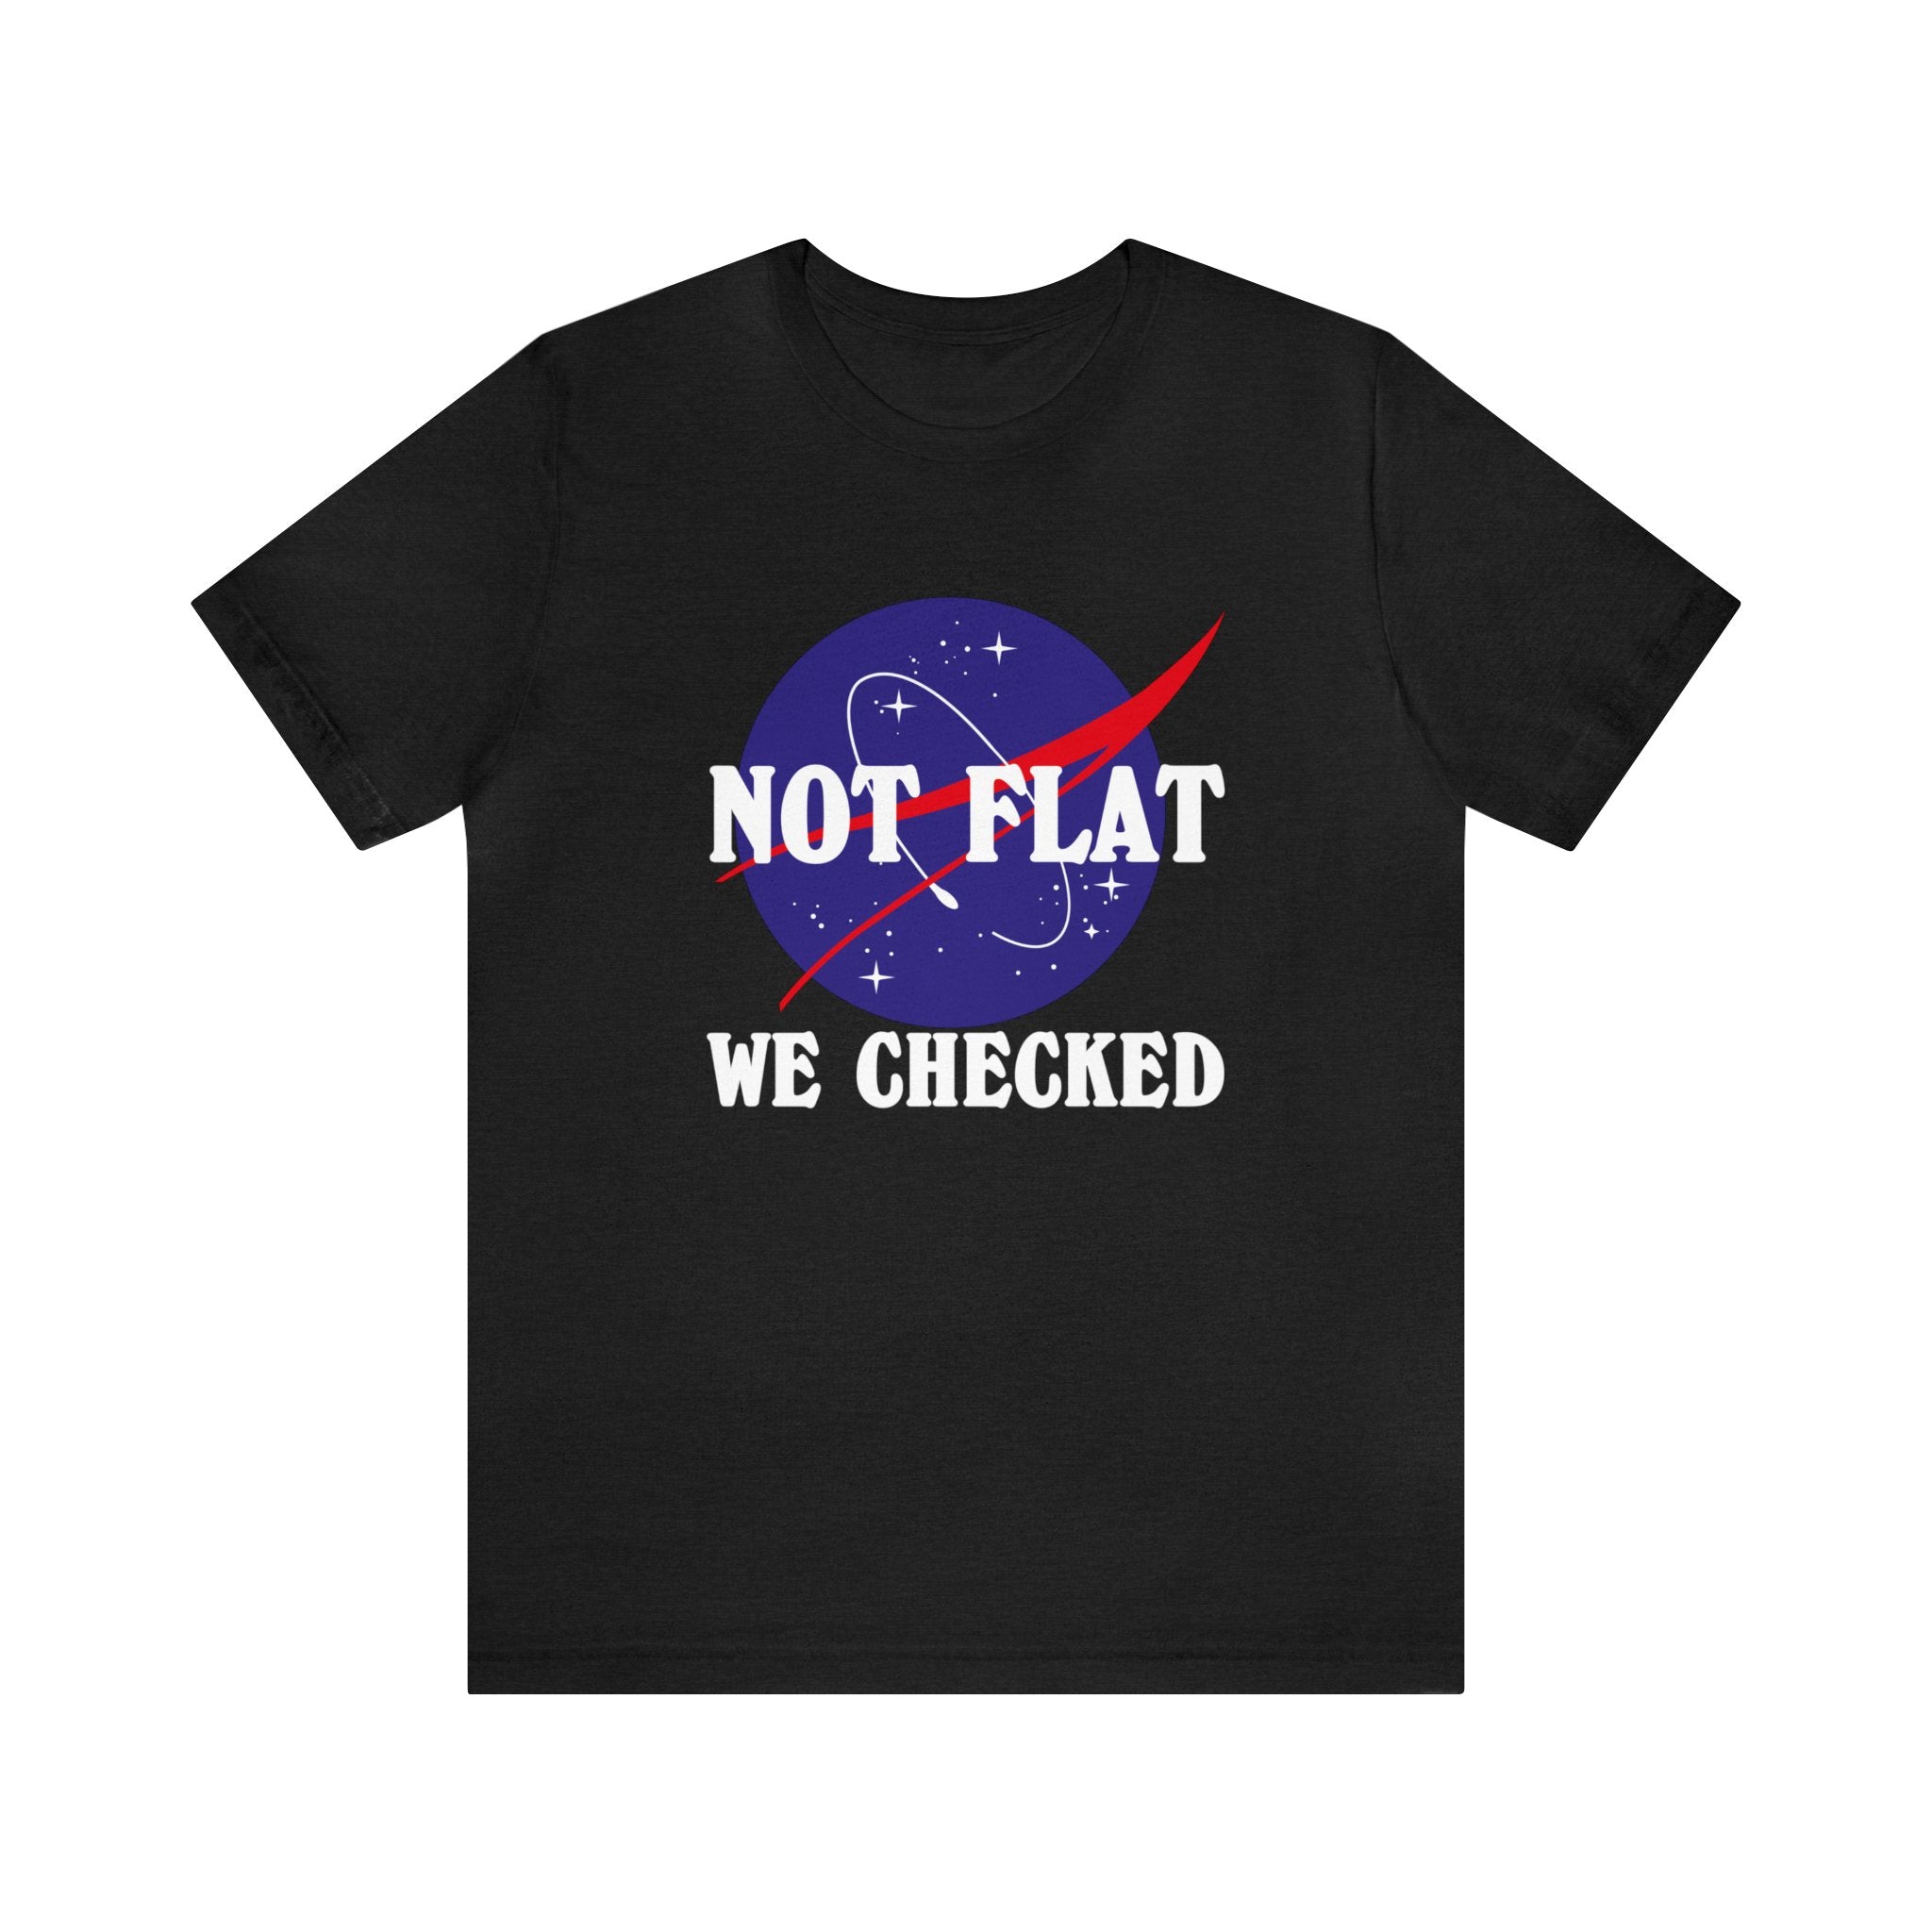 We examined an Earth Not Flat T-Shirt.